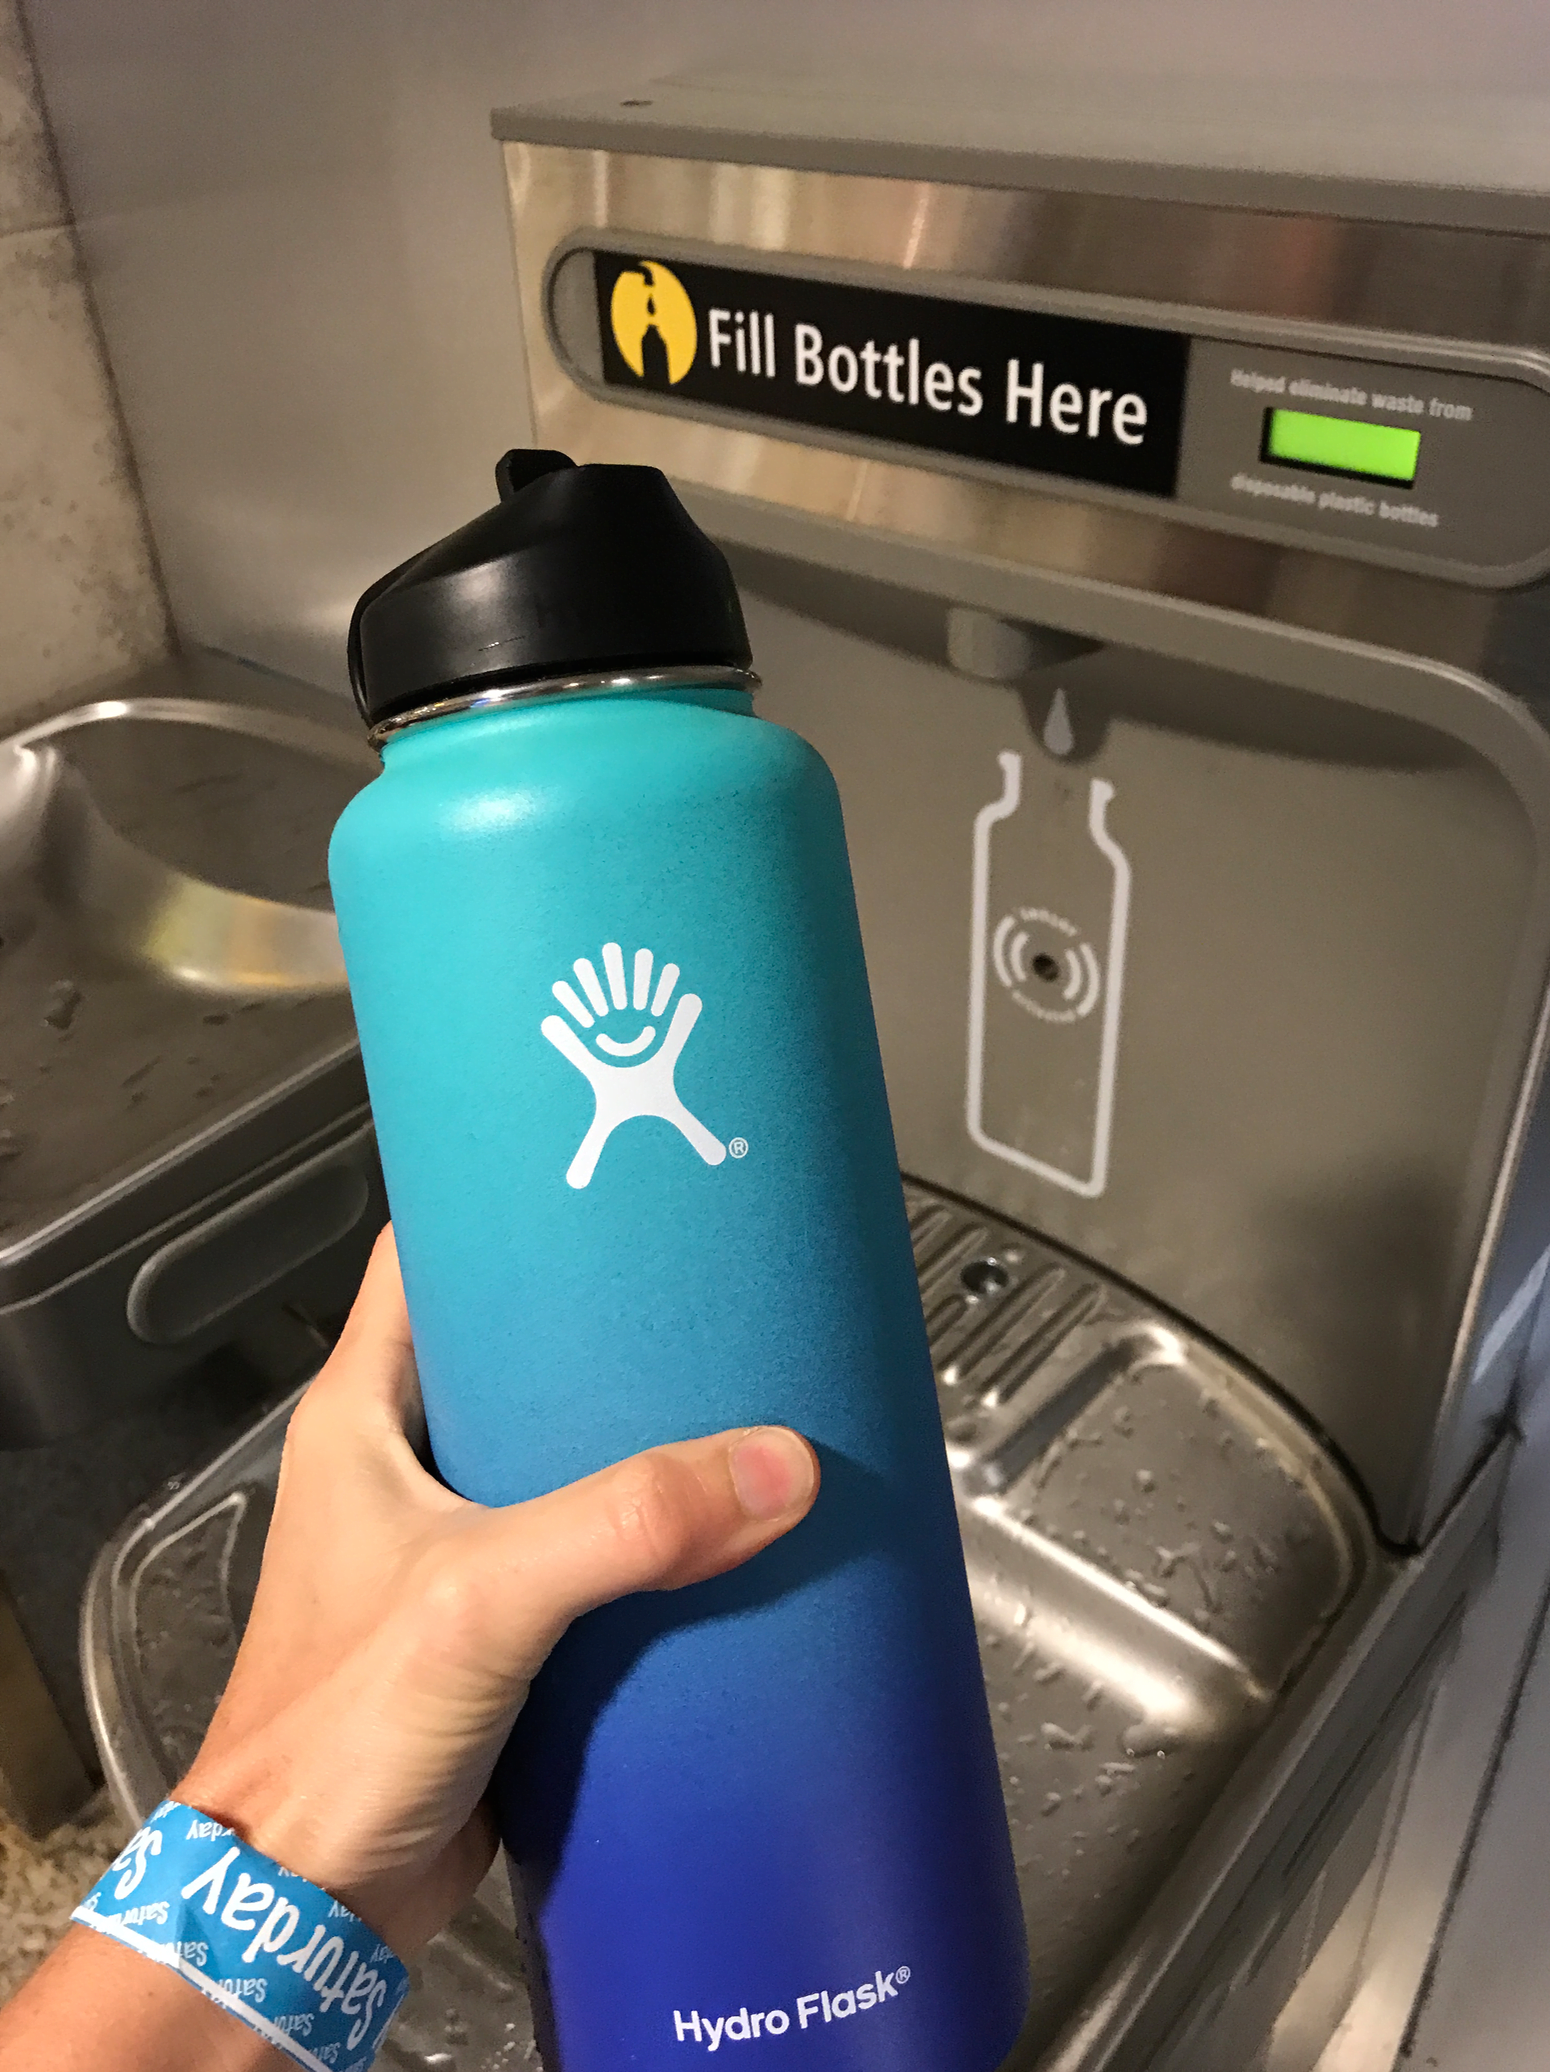 Hydro Flask filling up water bottle at the airport 